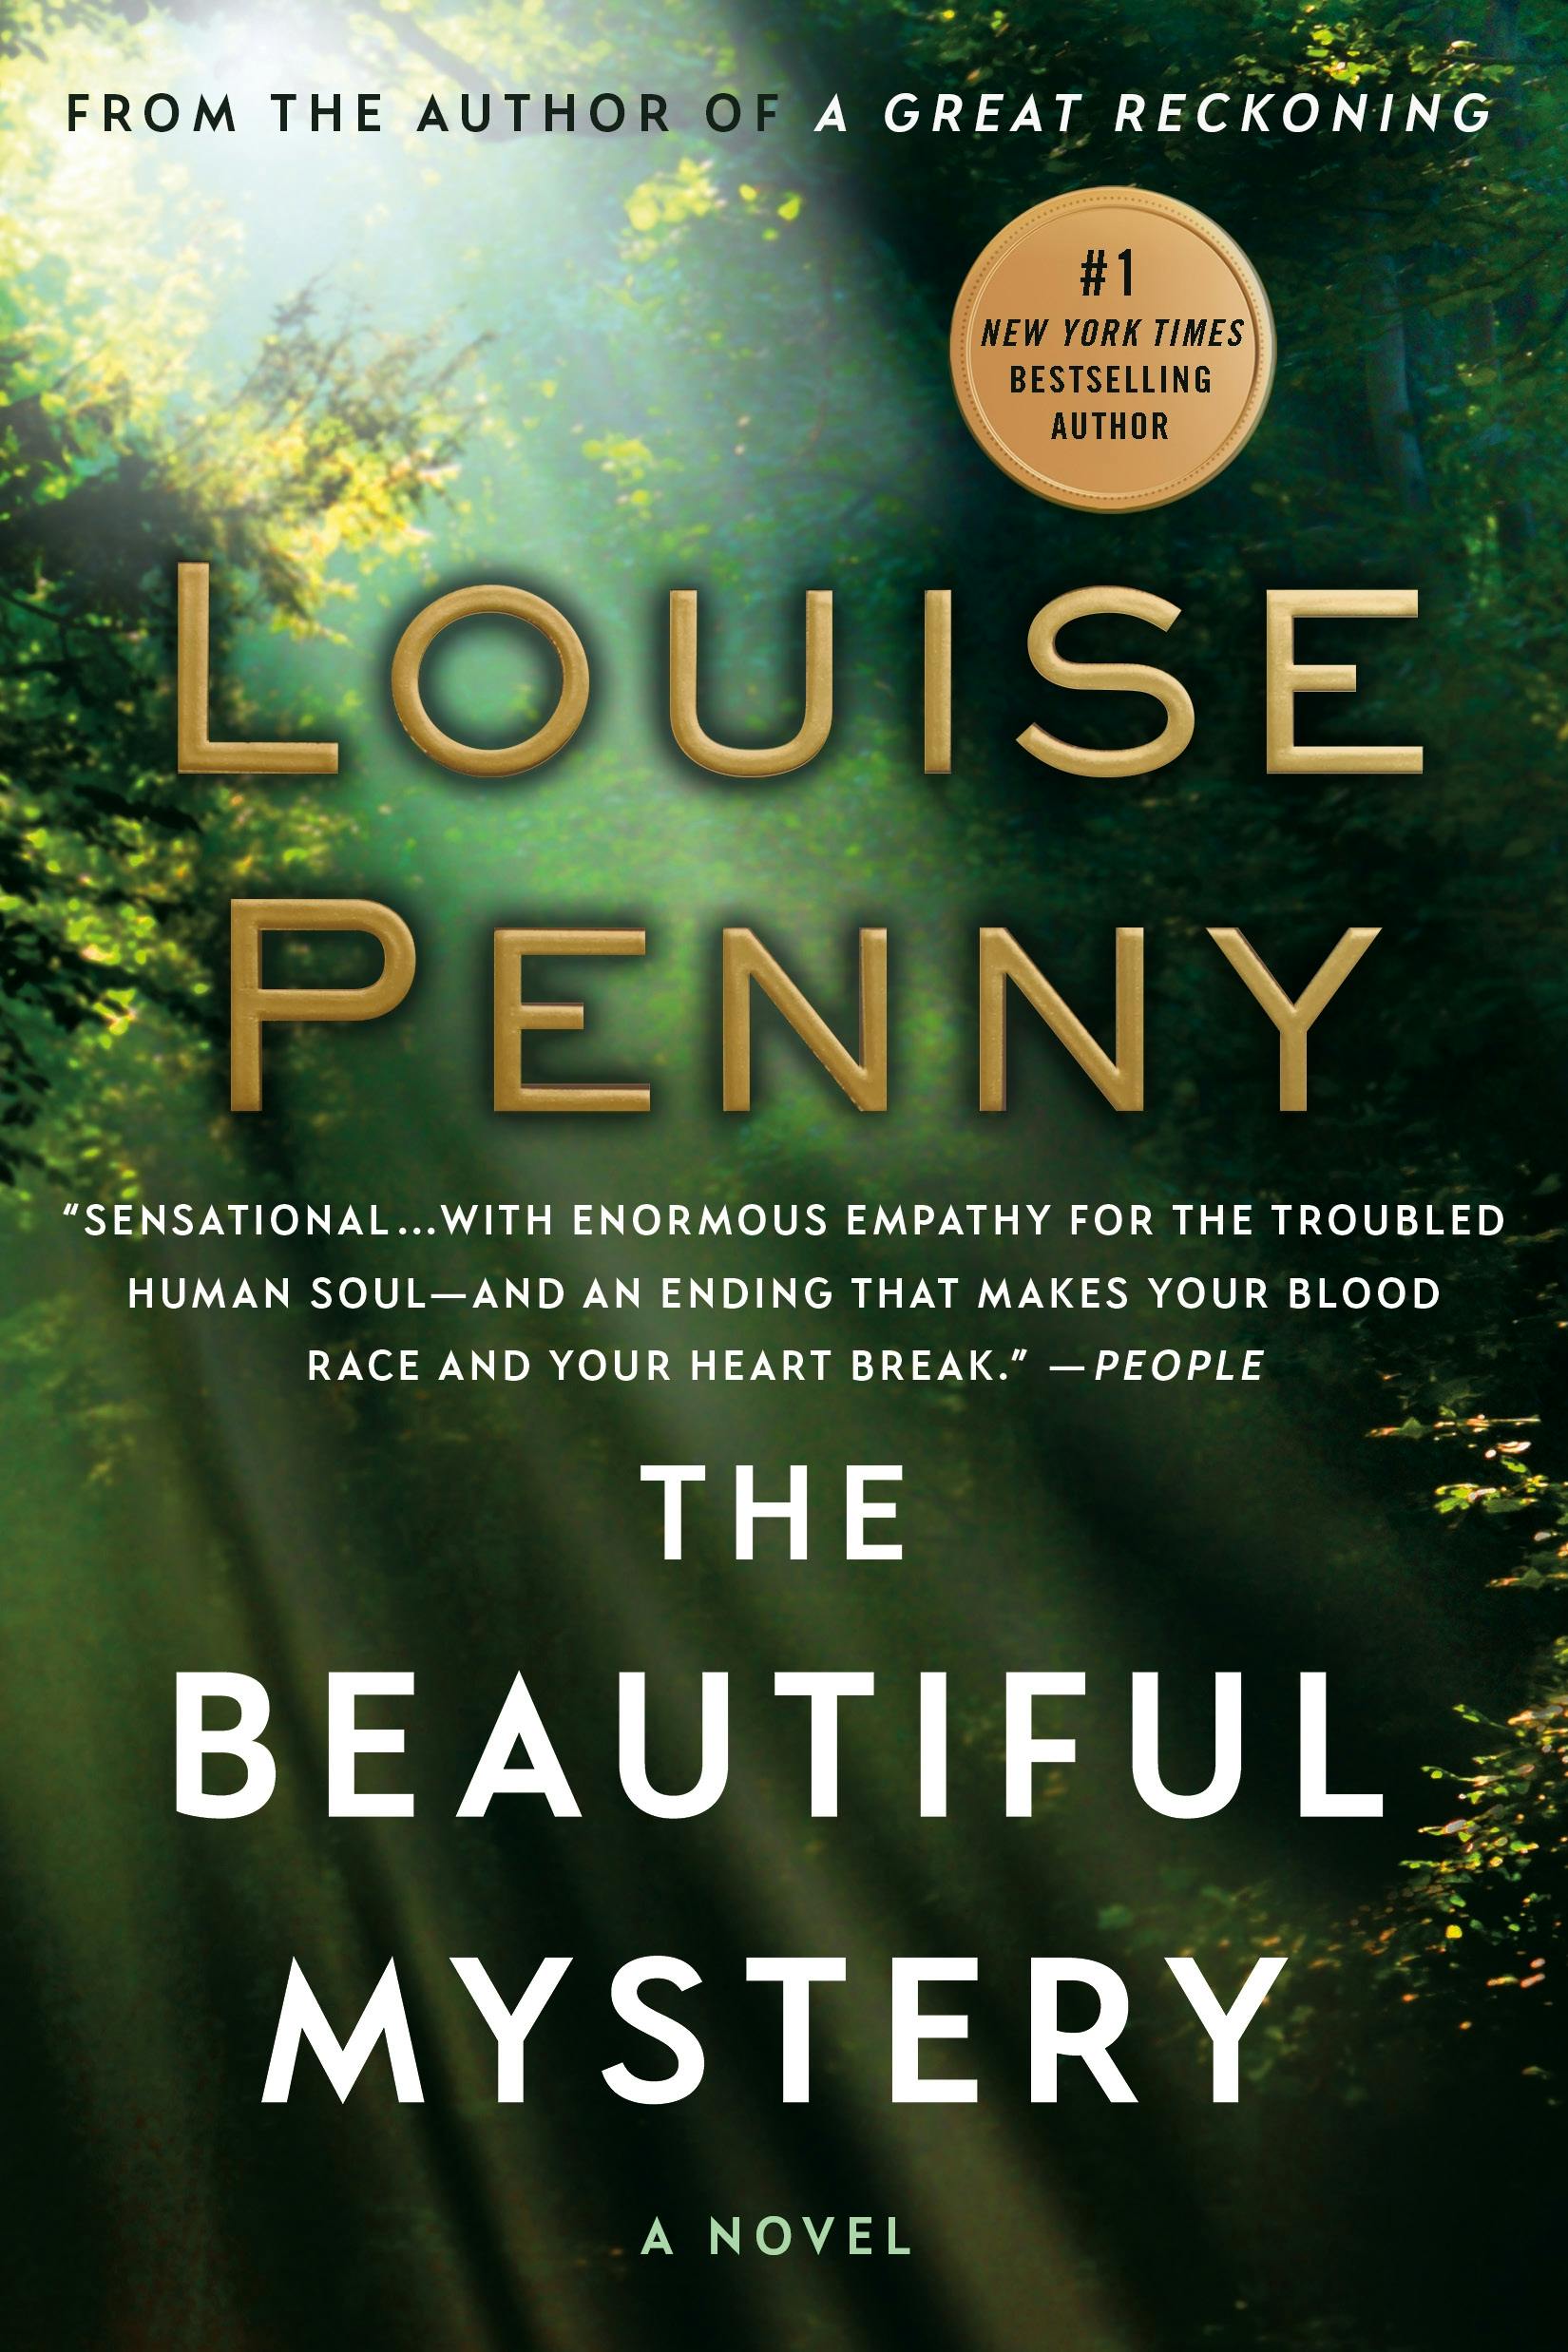 The Murder Stone by Louise Penny, a Mysterious Review.